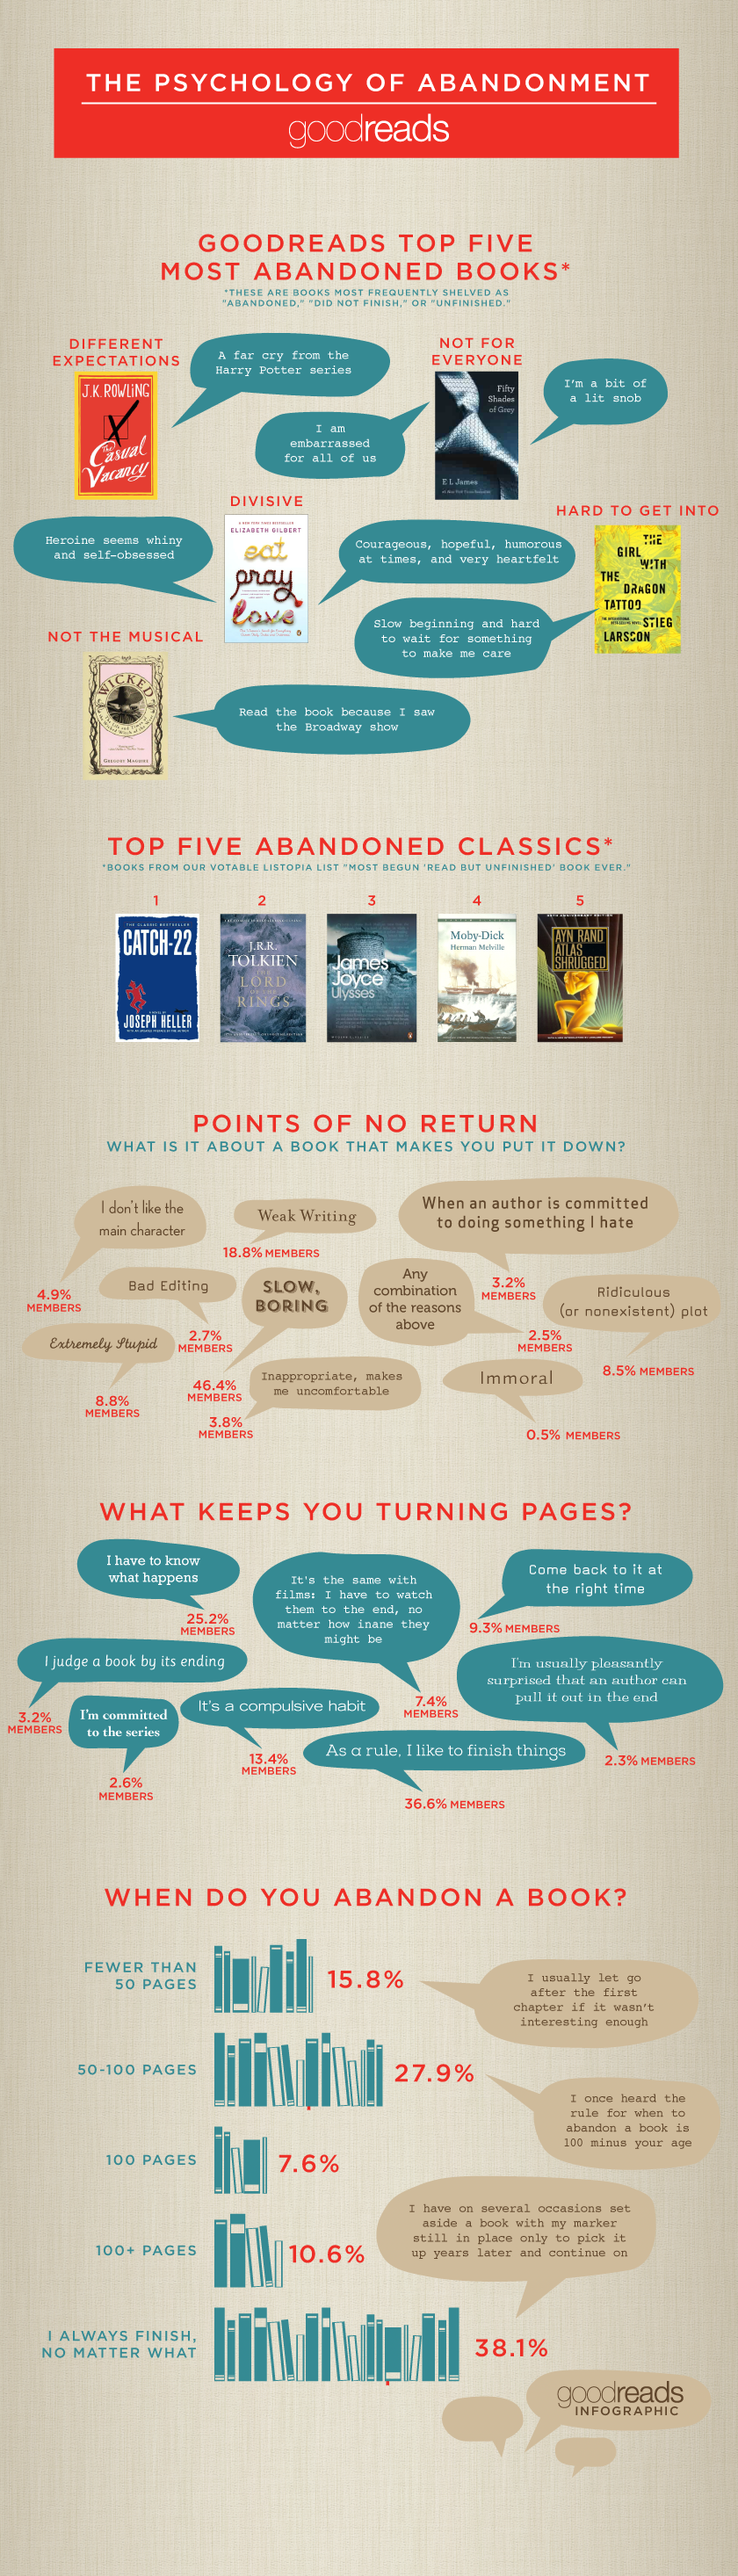 What Makes You Put Down a Book? Enlightening infographic from Goodreads with sta